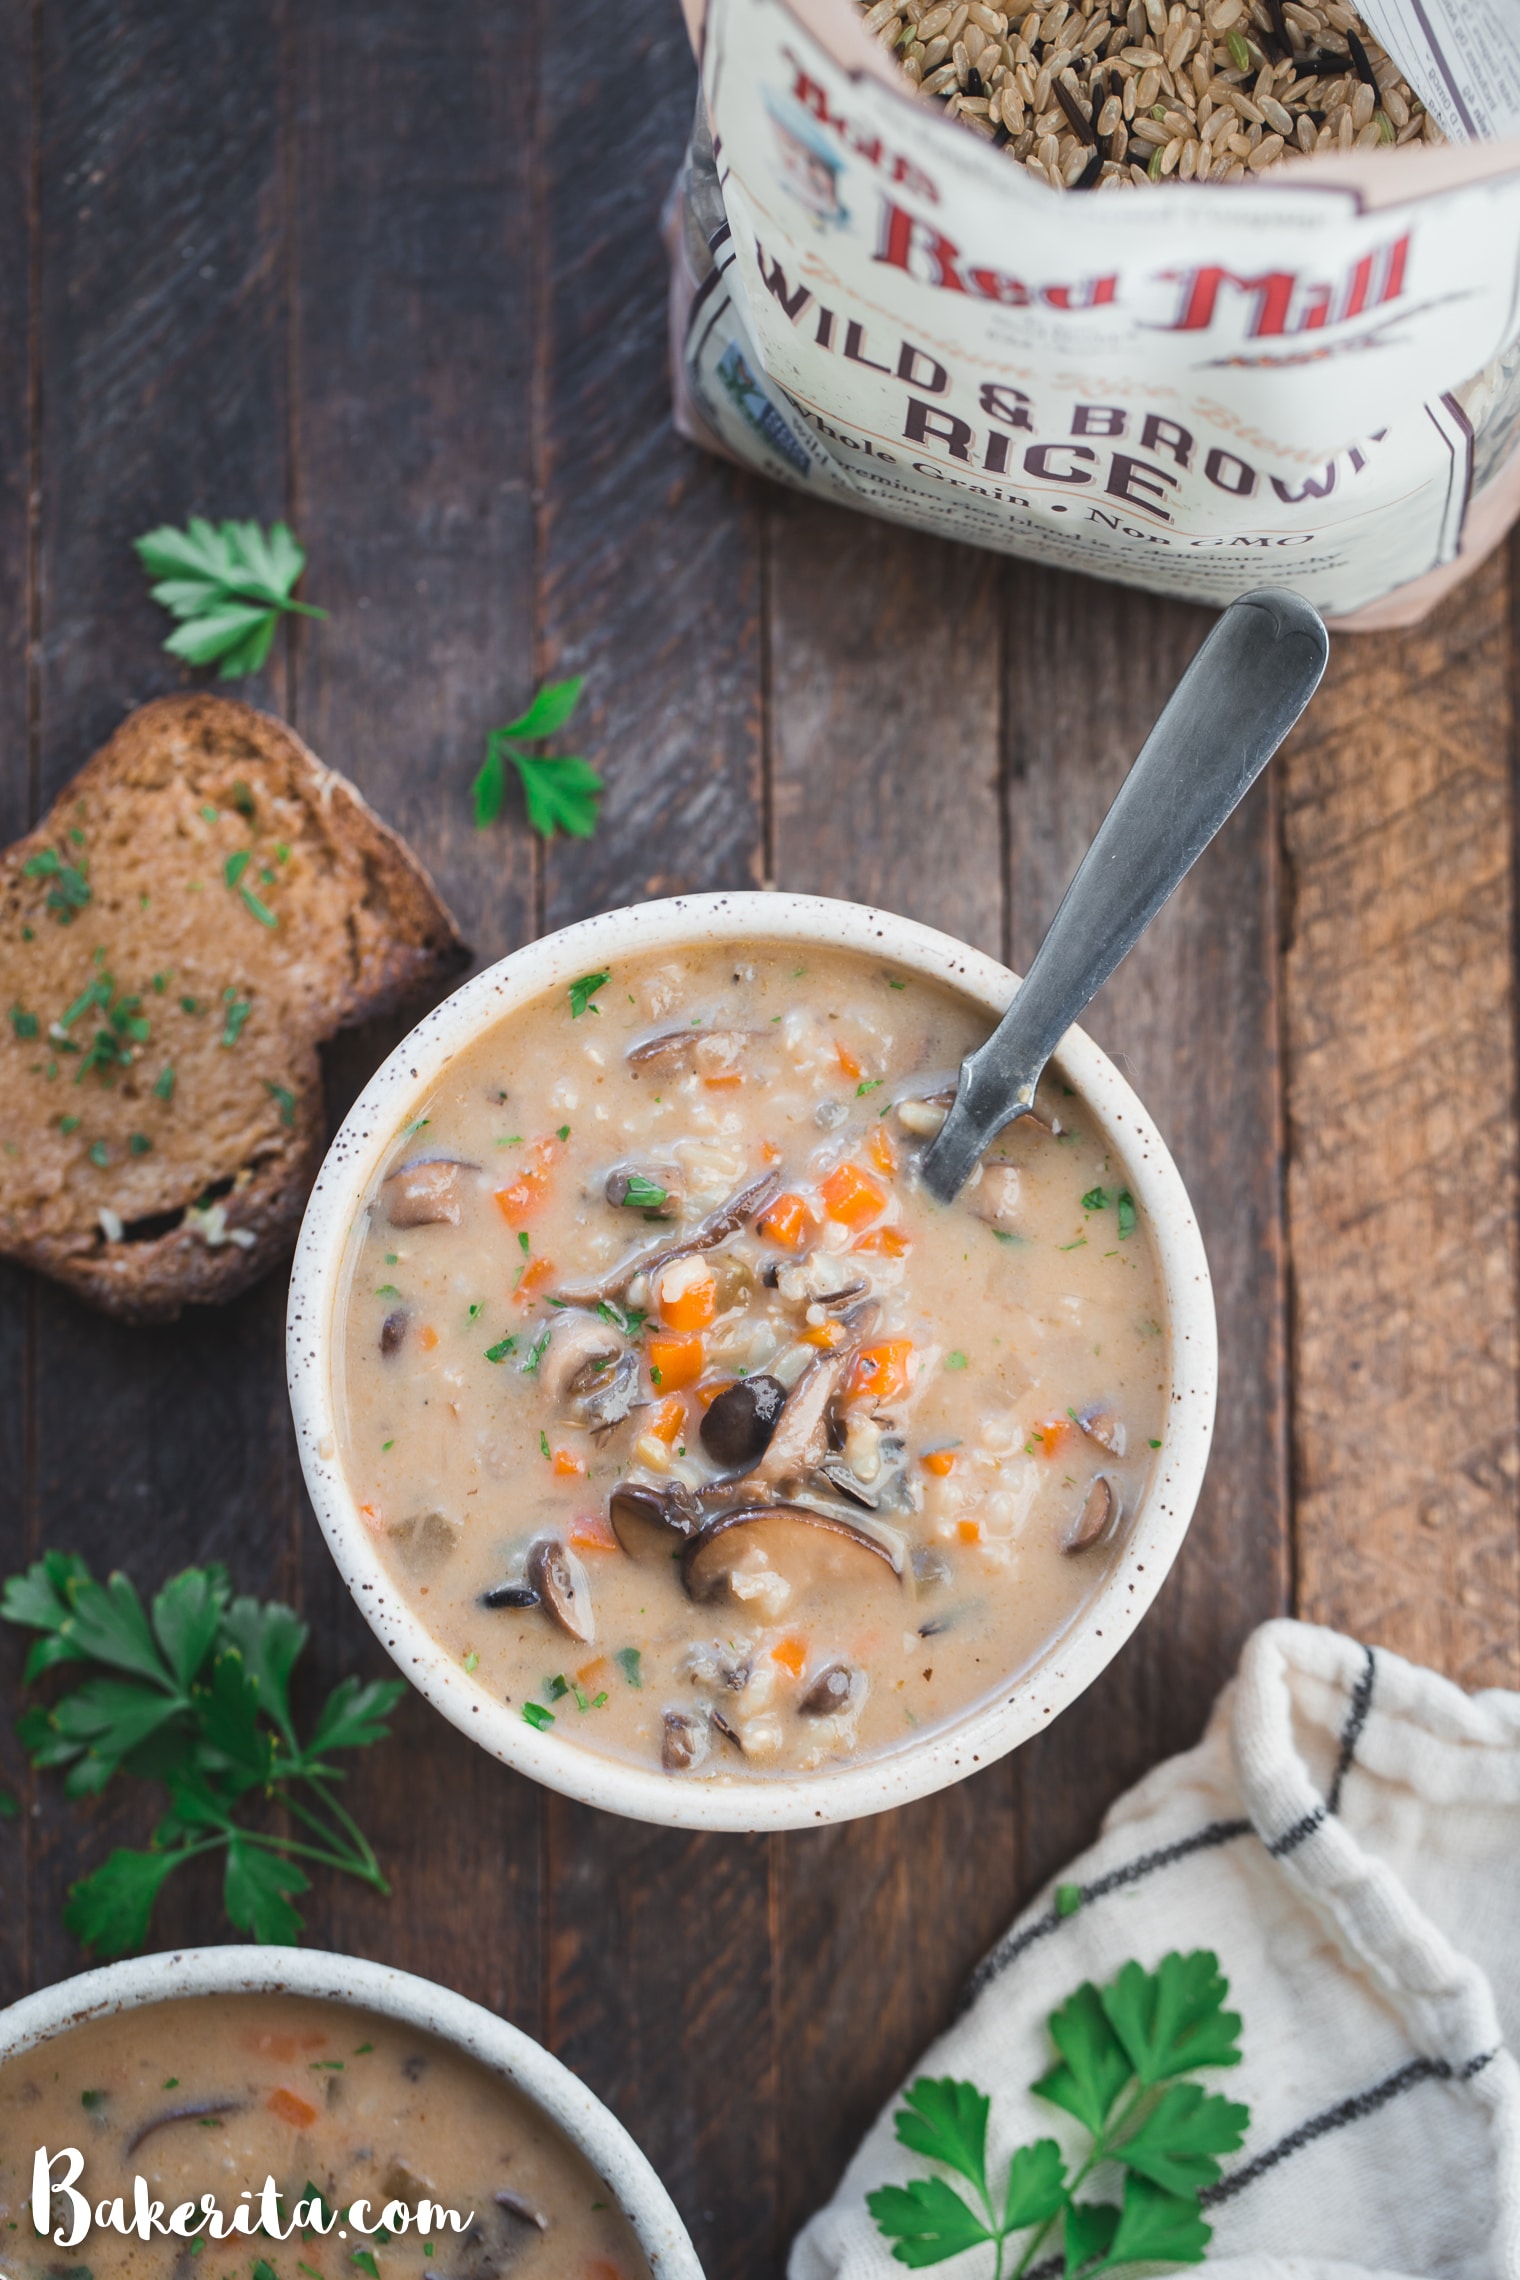 This Vegan Mushroom Wild Rice Soup is cozy, comforting, and so simple to make in under an hour using just one pot! It's the perfect healthy vegan dinner for chilly nights. It's loaded with mushrooms, wild rice, and vegetables.